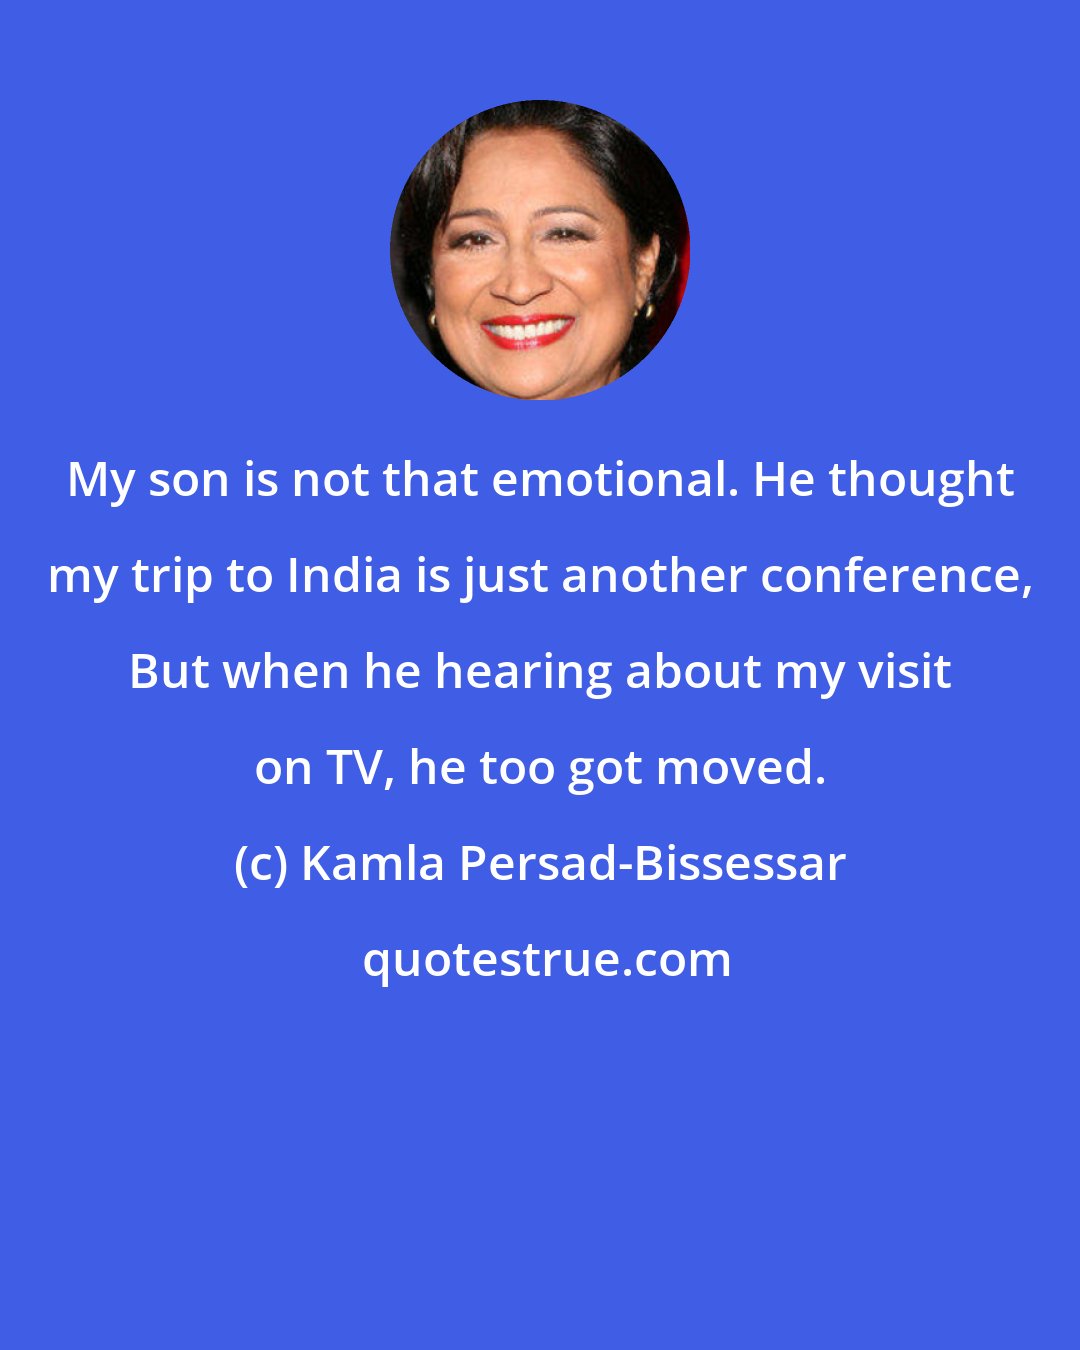 Kamla Persad-Bissessar: My son is not that emotional. He thought my trip to India is just another conference, But when he hearing about my visit on TV, he too got moved.